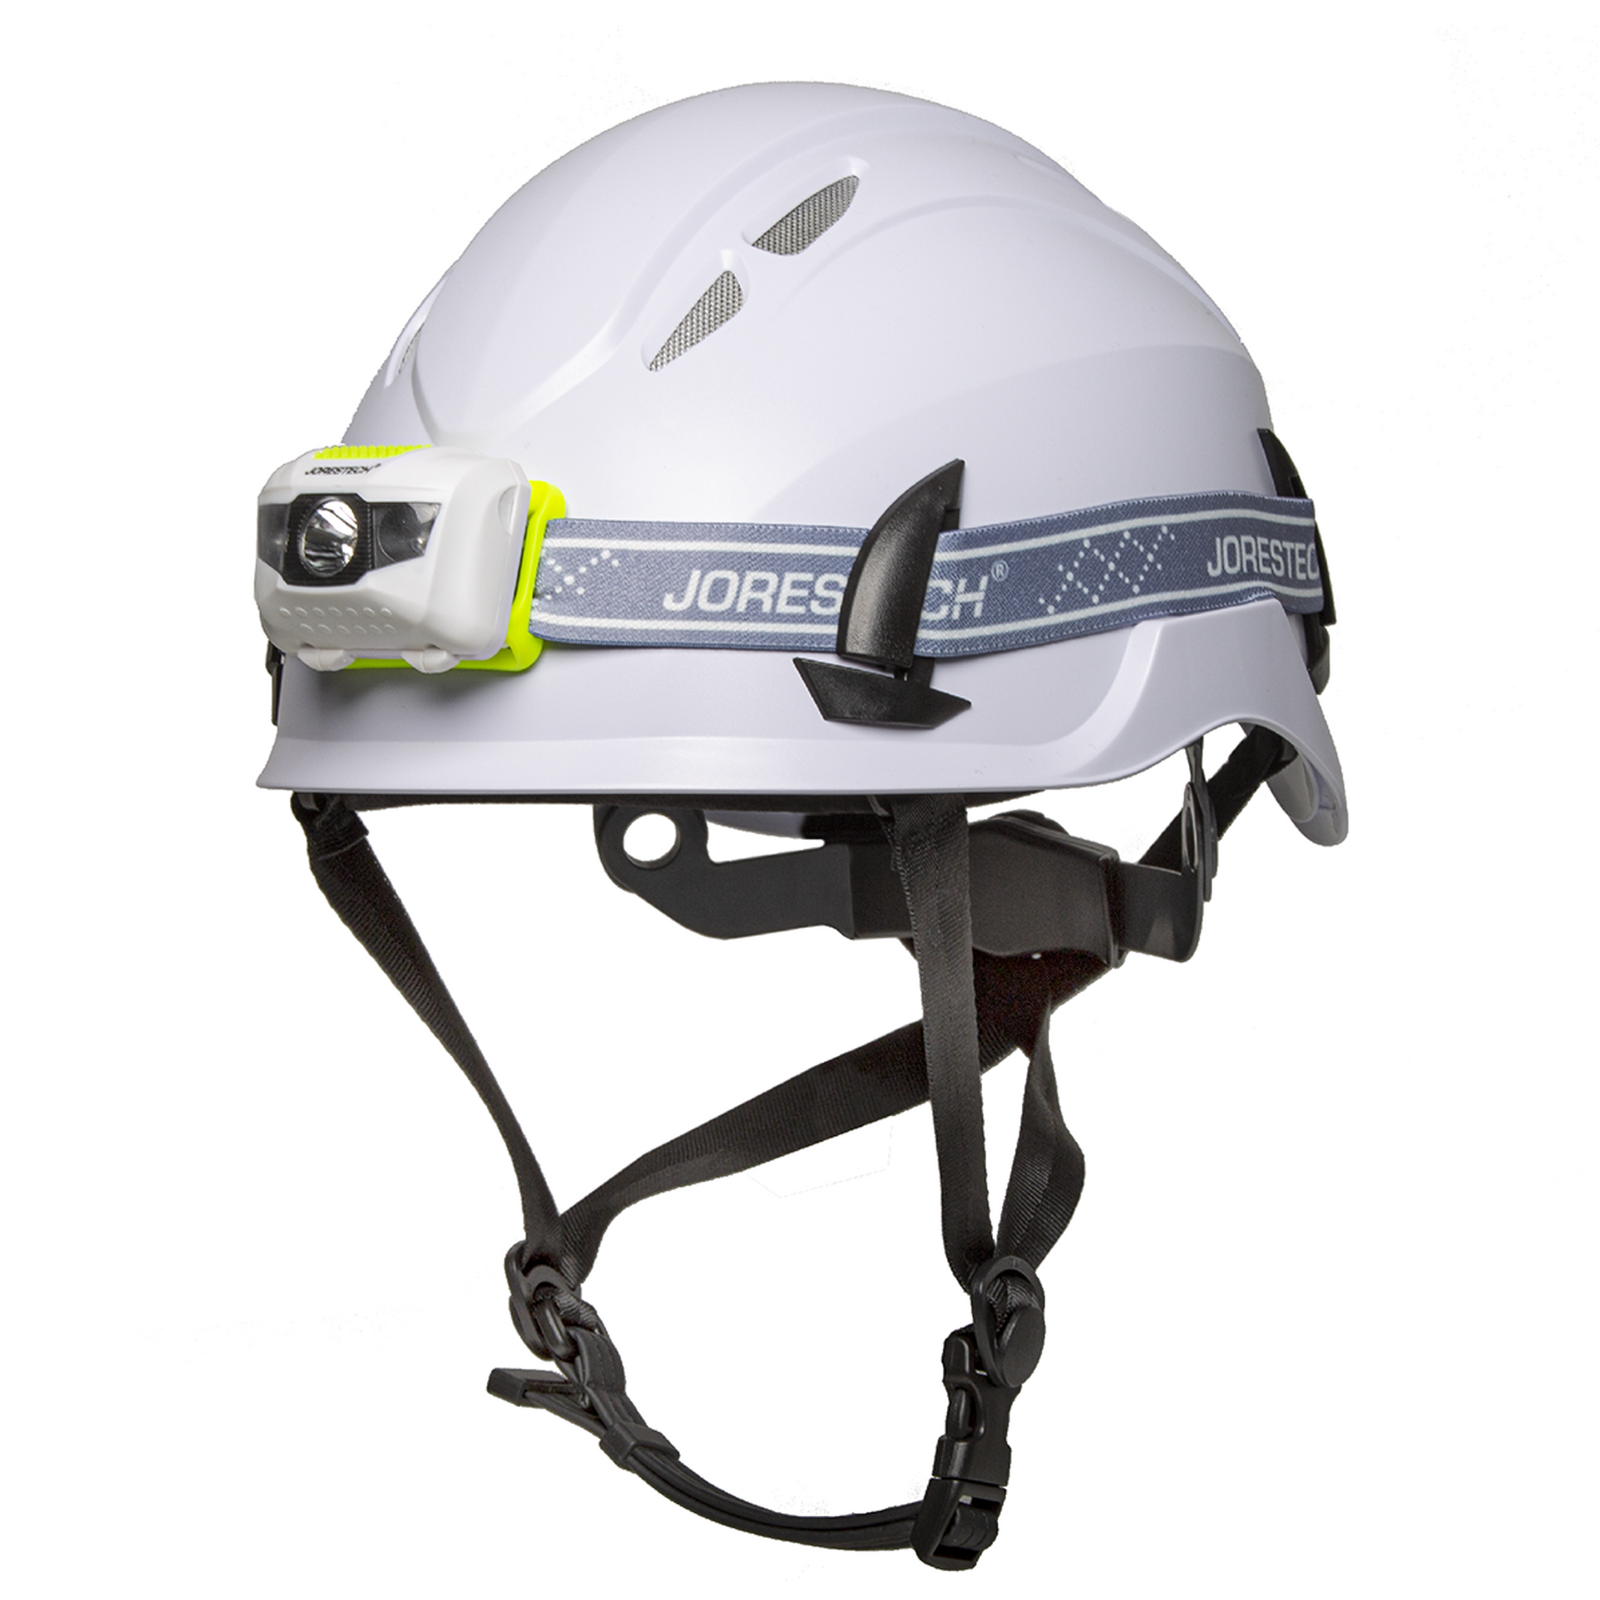 Diagonal view of a white ventilated JORESTECH hard hat with chin strap and a white water resistant headlamp bundle